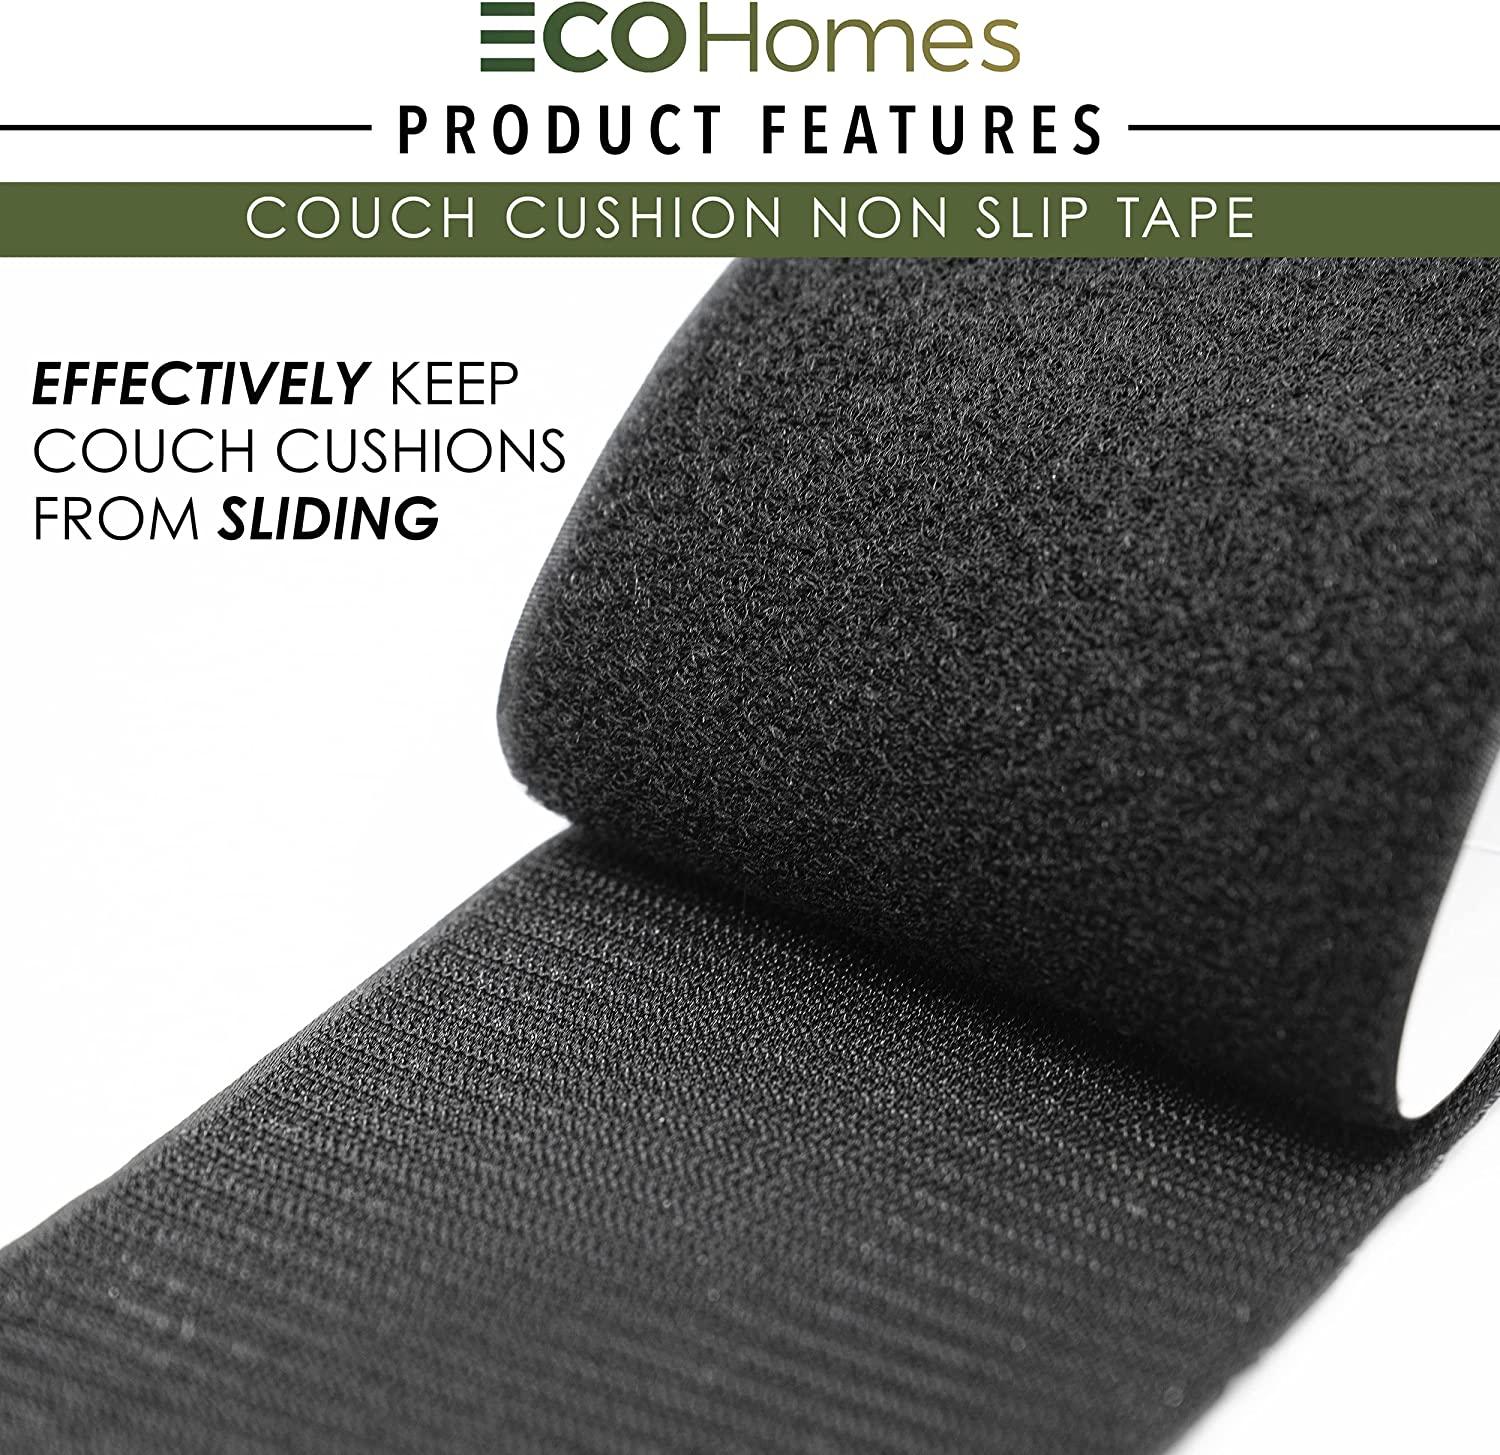 2m Couch Cushion Non Slip Pads to Keep Couch Cushions from Sliding, Hook  Loop Tape, Sticky Cushion Gripper Keep Home Office Use - AliExpress